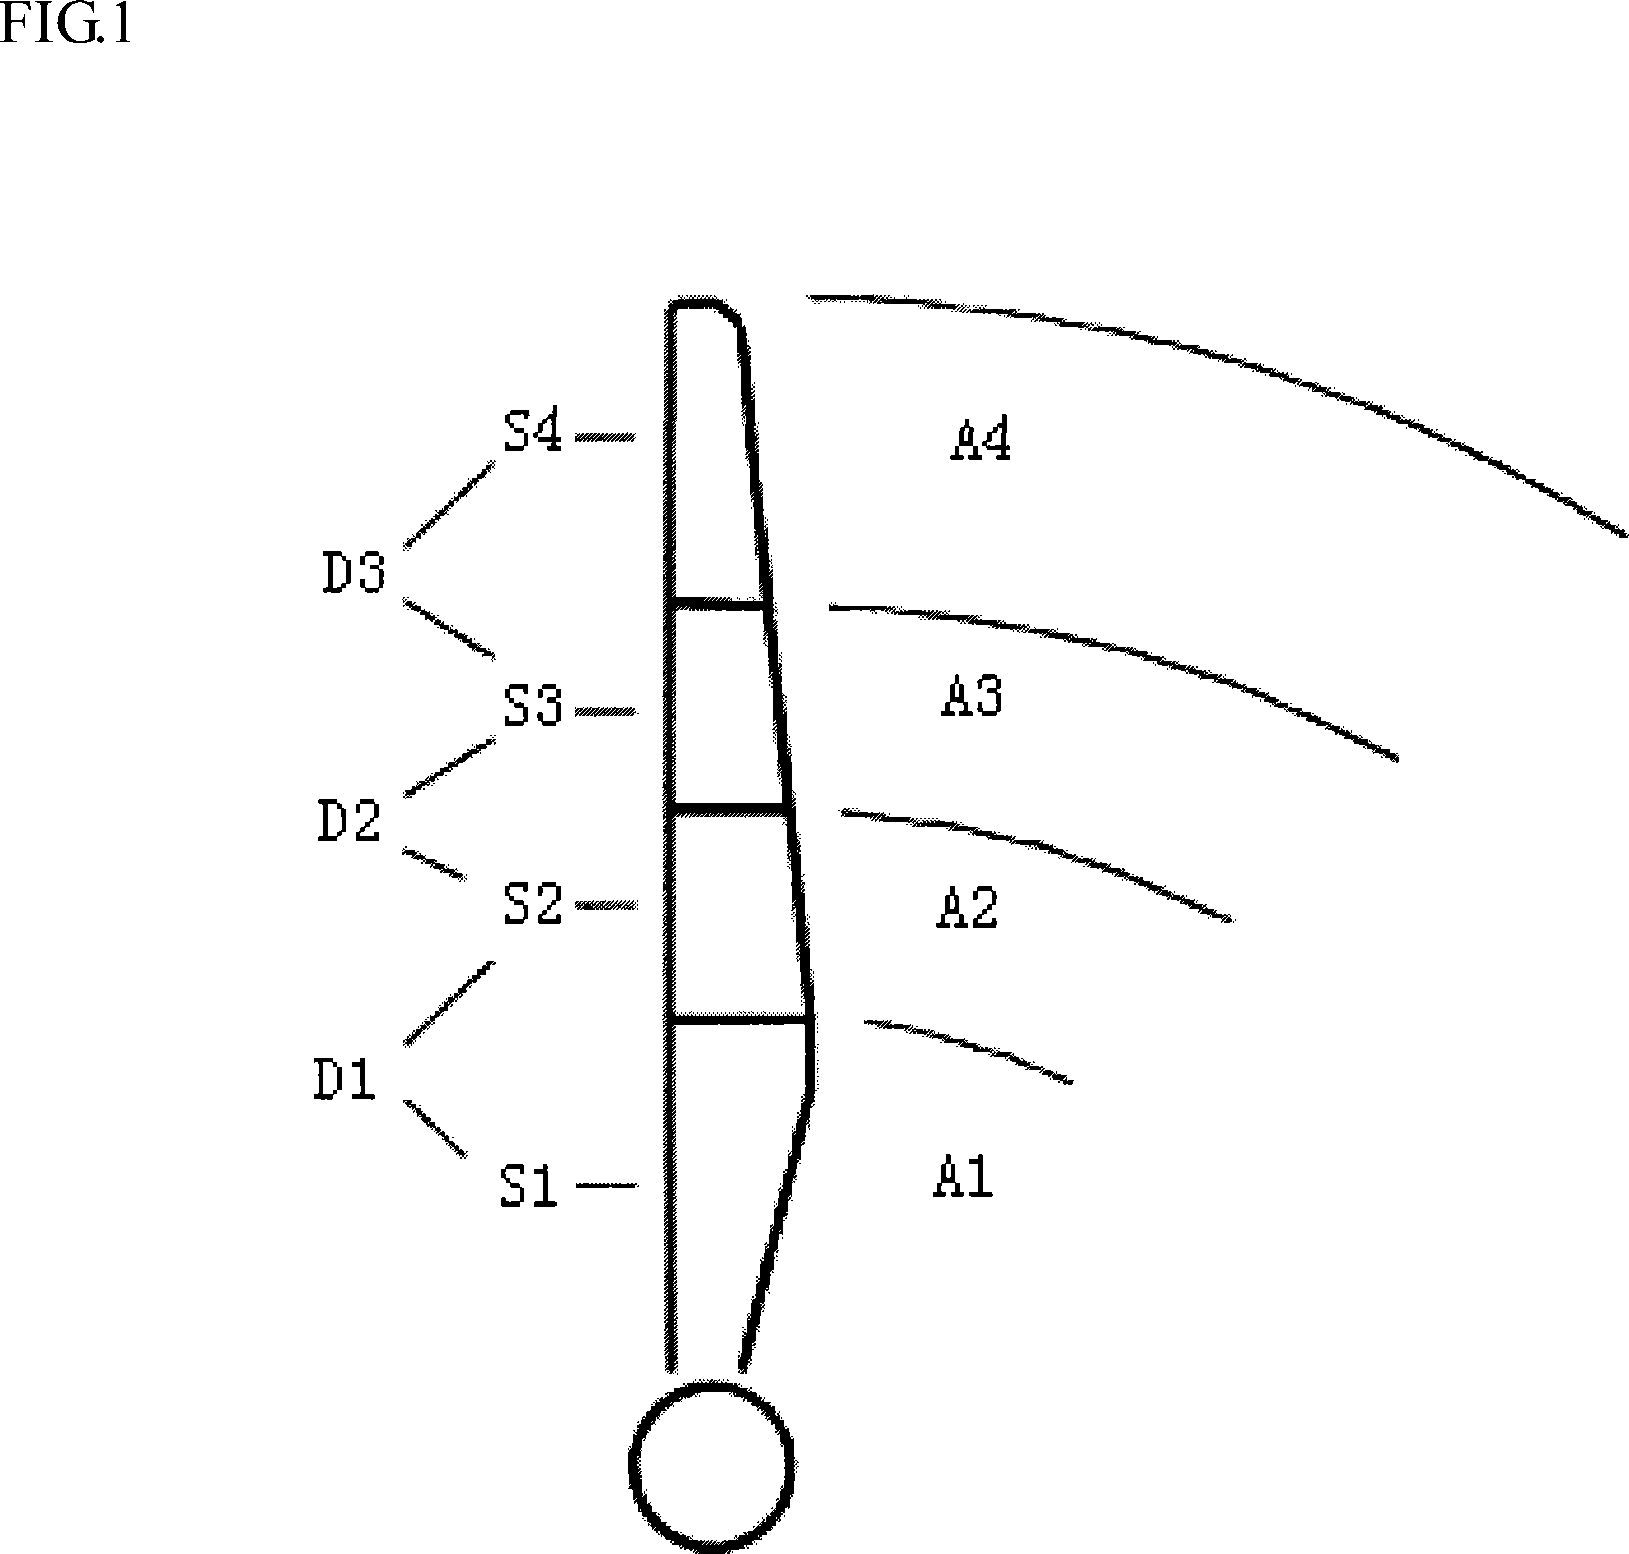 System for controlling wind turbine power, consisting in varying the coefficient and size of the swept areas